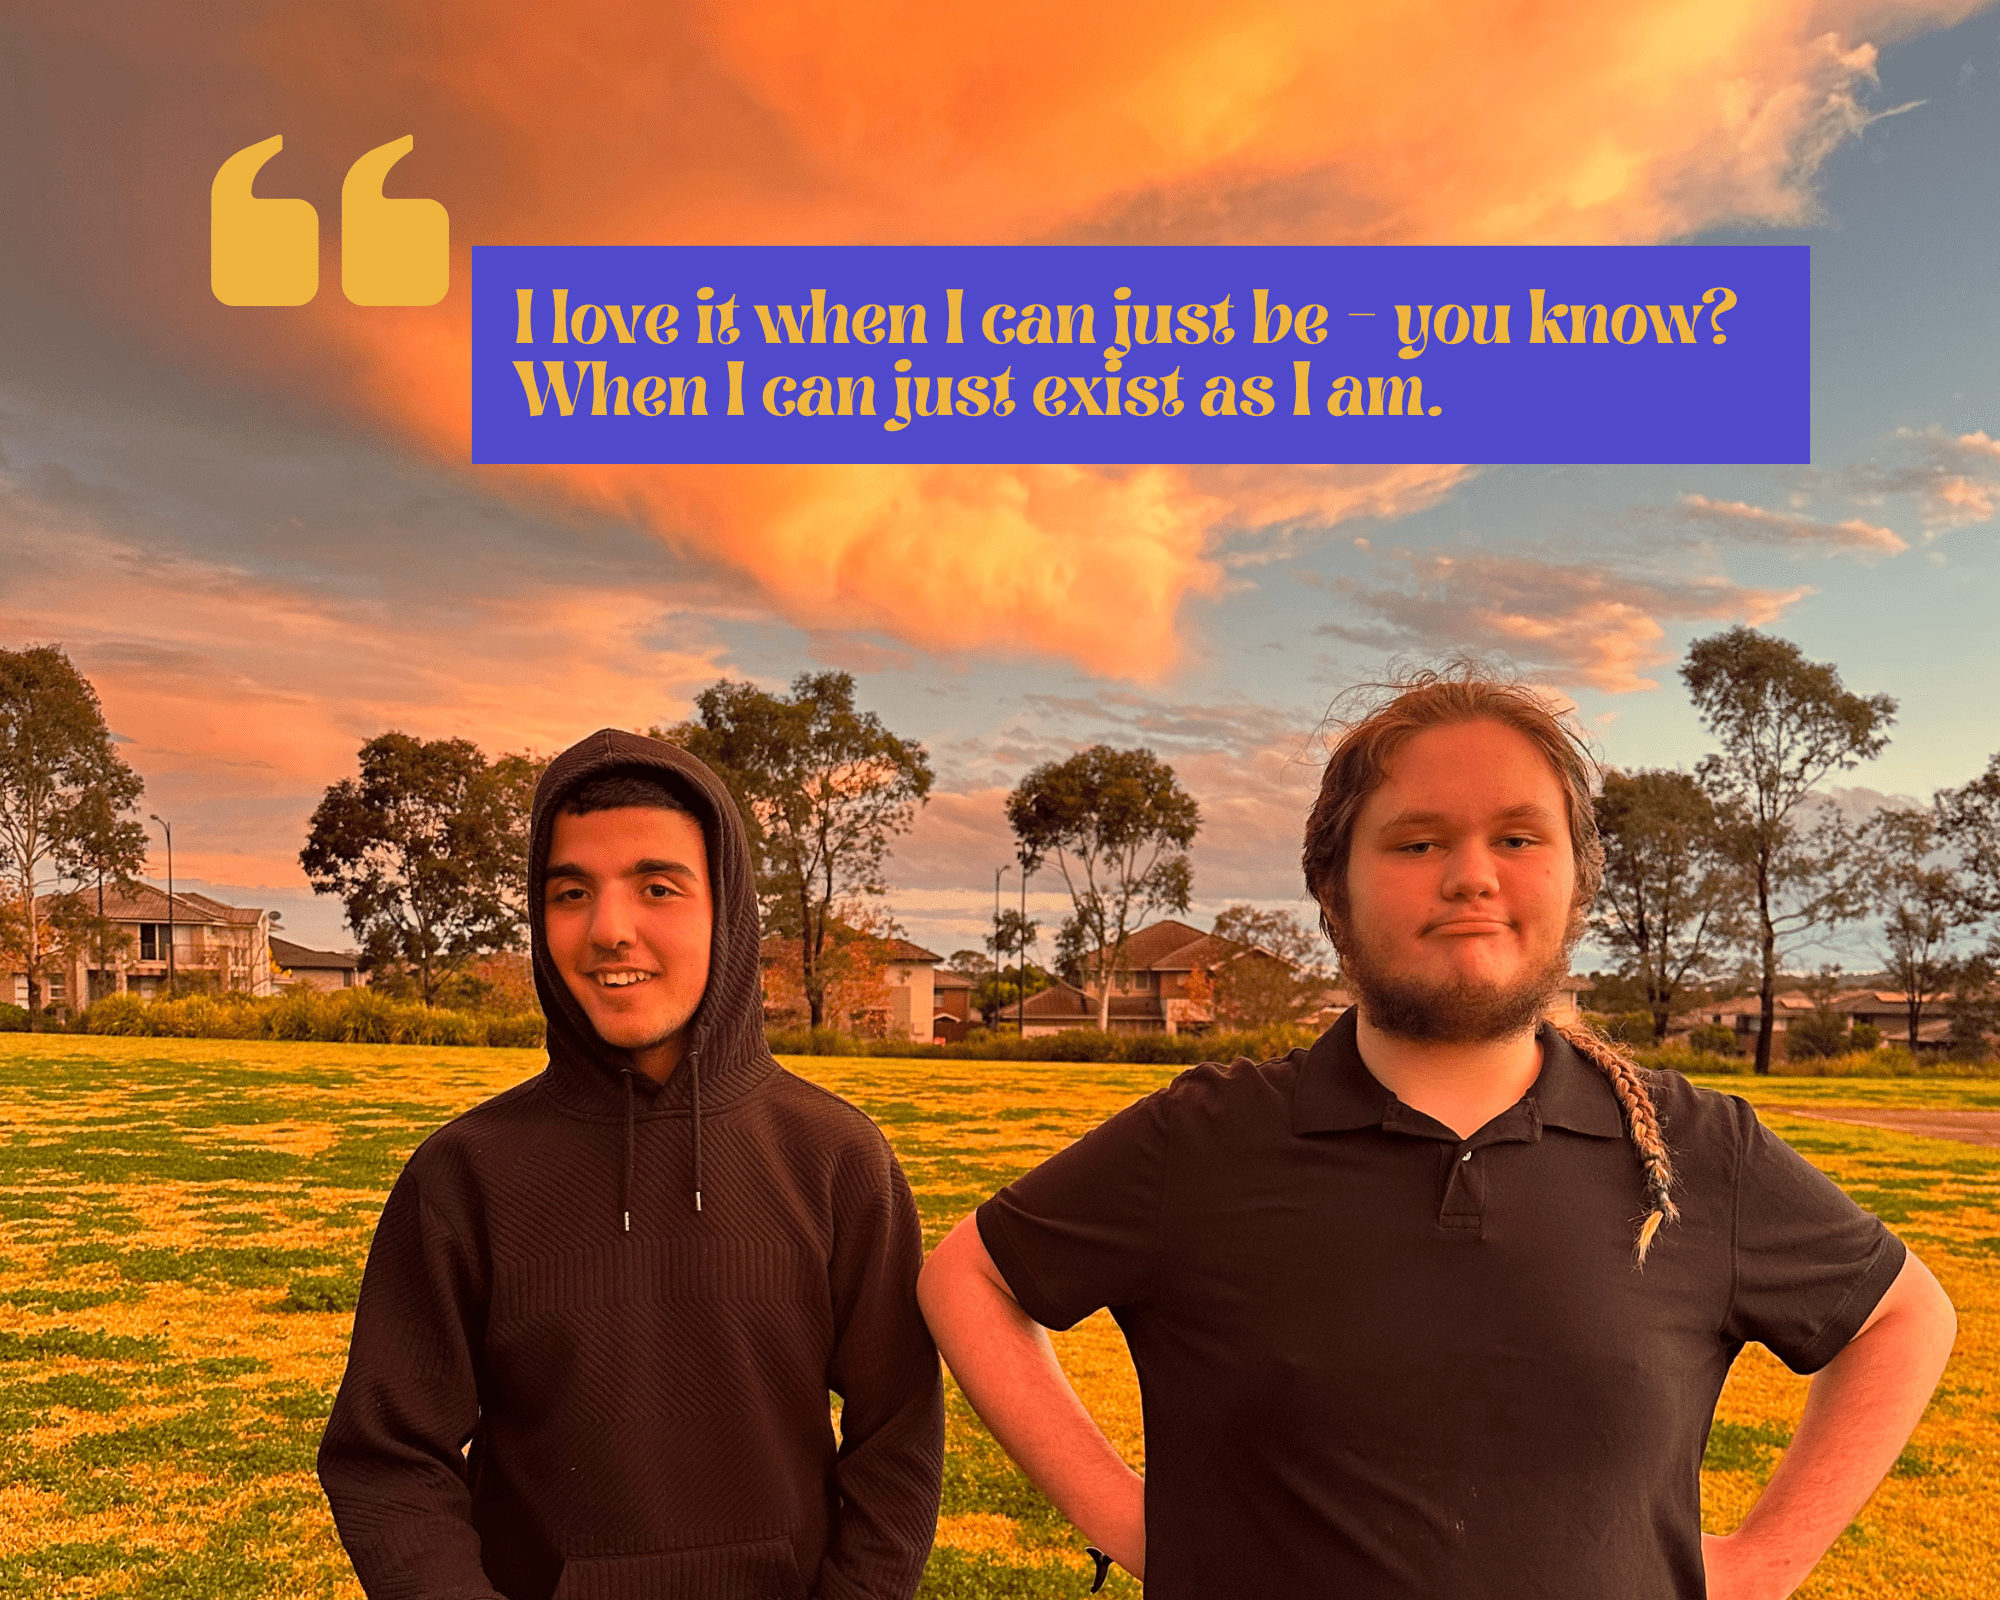 Neuro-affirming: What is it and why is it so important? Two teen boys look happy in front of a sunset.